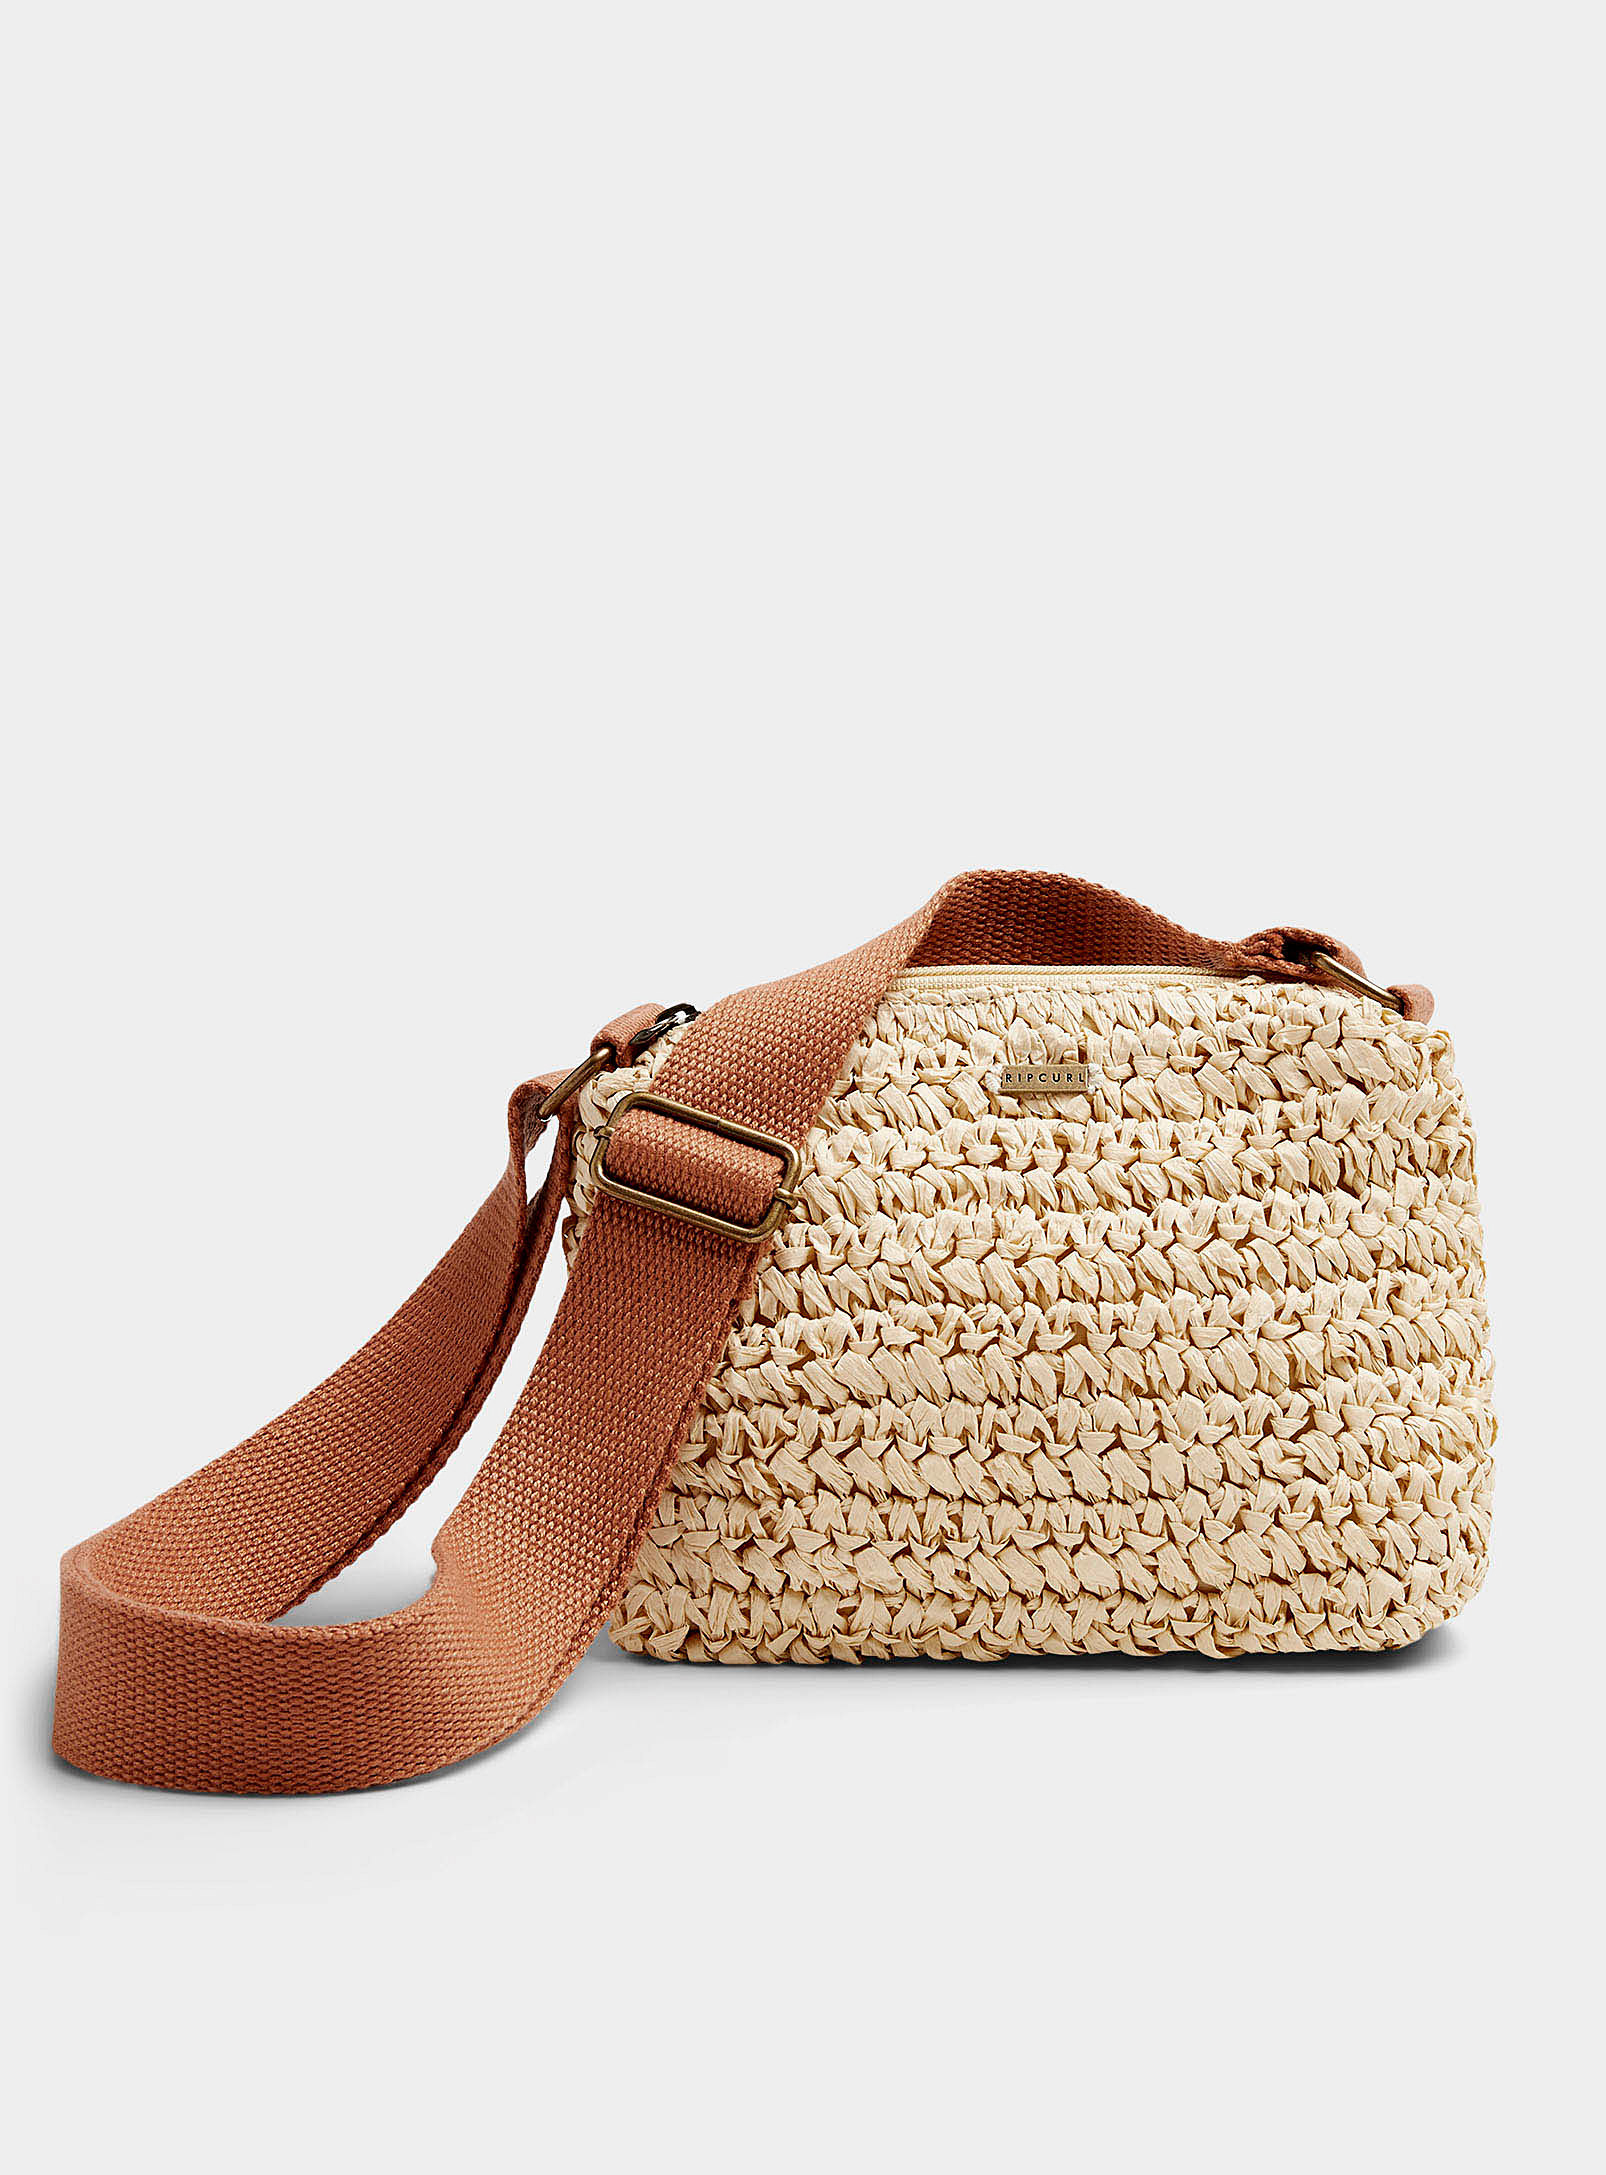 Rip Curl Small Braided Straw Bag In Brown